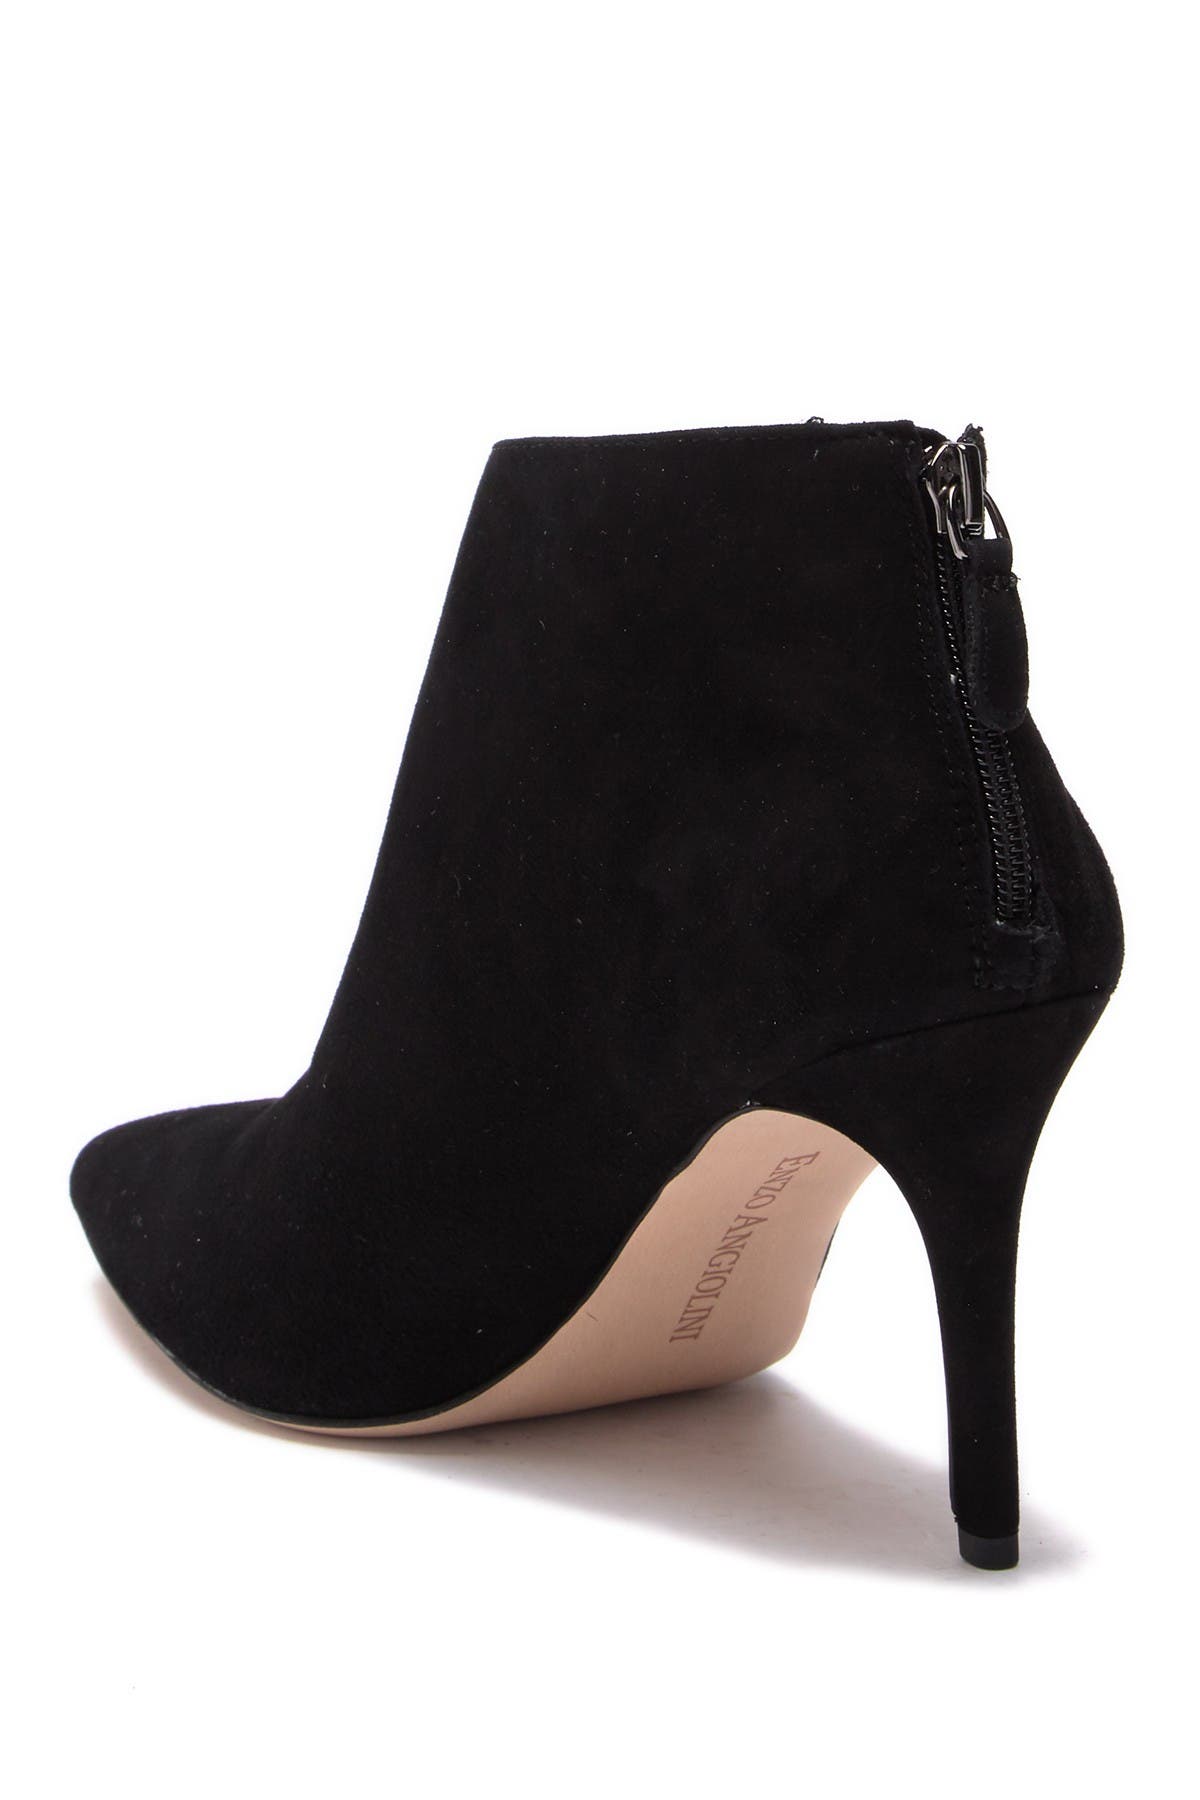 Enzo Angiolini | Ruthely Suede Bootie 